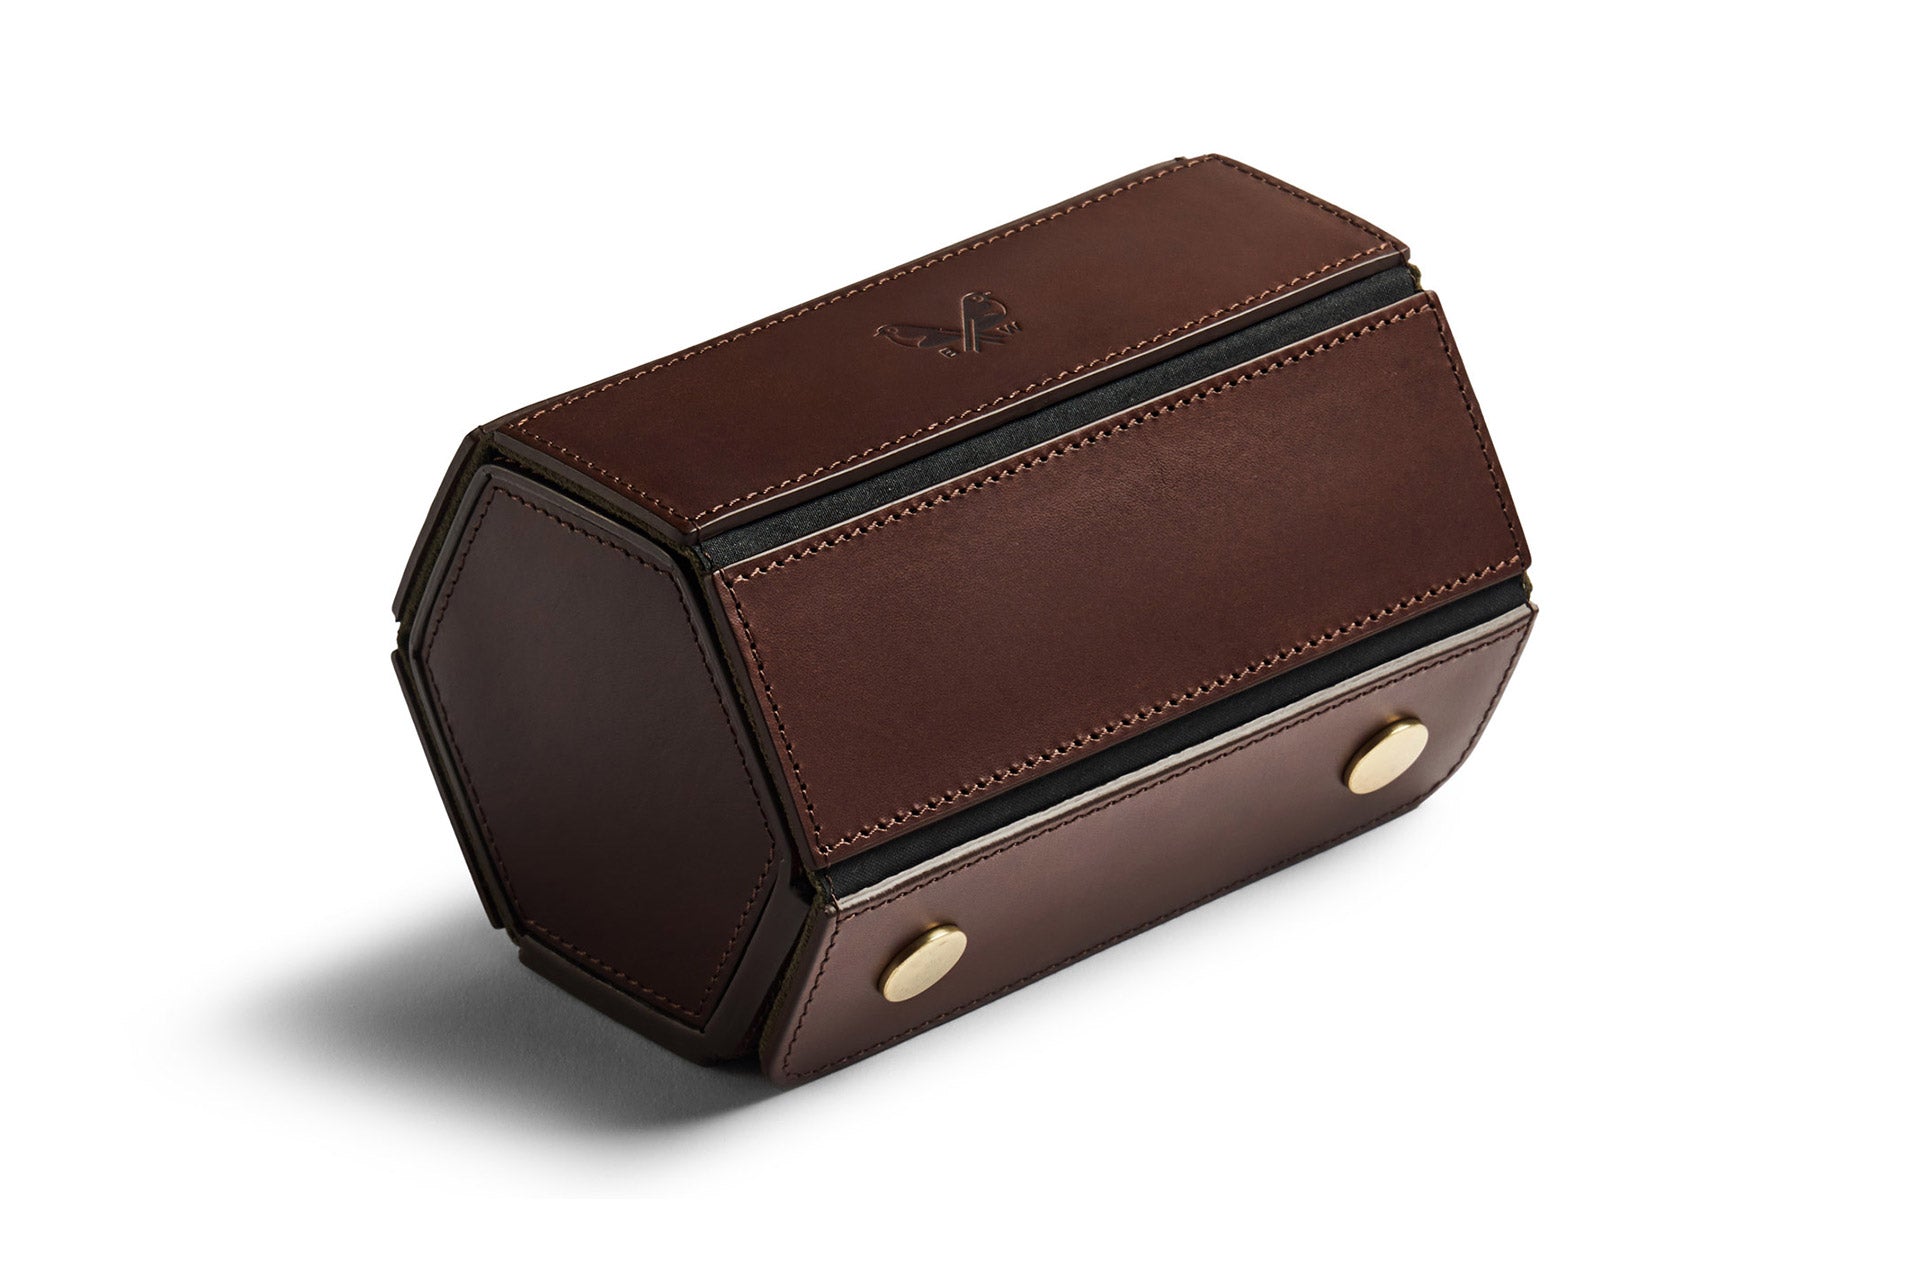 The Bennett Winch Double Watch Roll - Brown Leather Watch Case